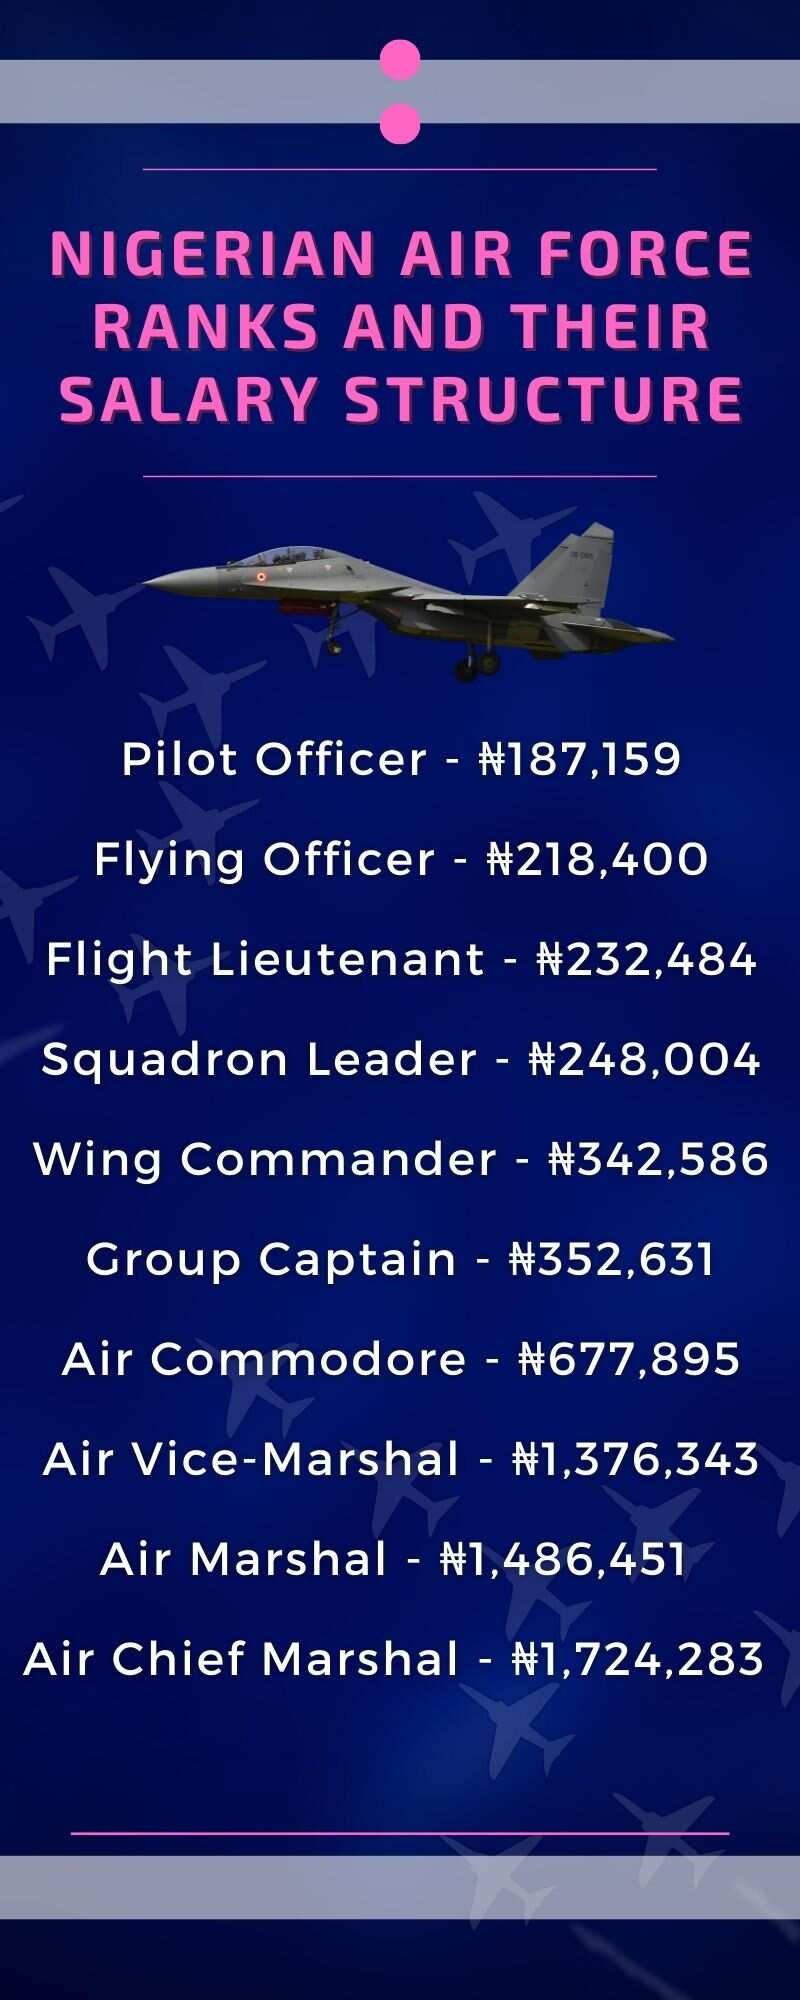 Nigerian Air Force ranks and their salary structure